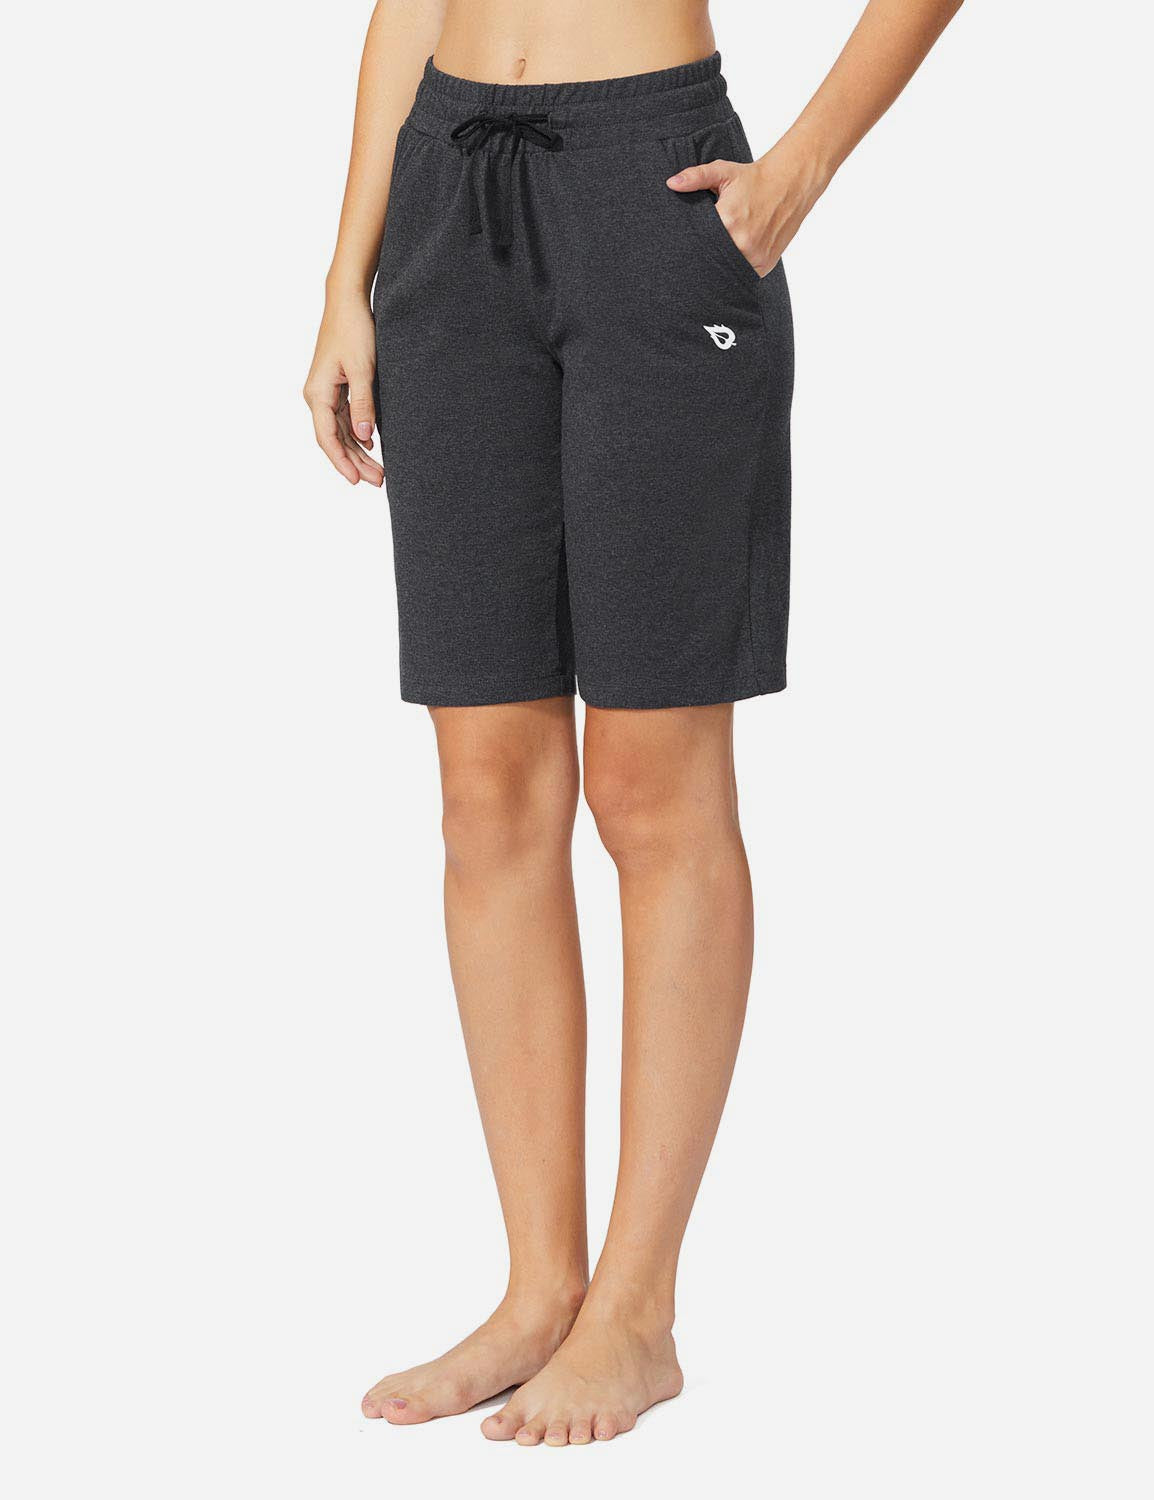 Baleaf Women's Mid-Rise Cotton Pocketed Bermuda Shorts abh104 Charcoal Side